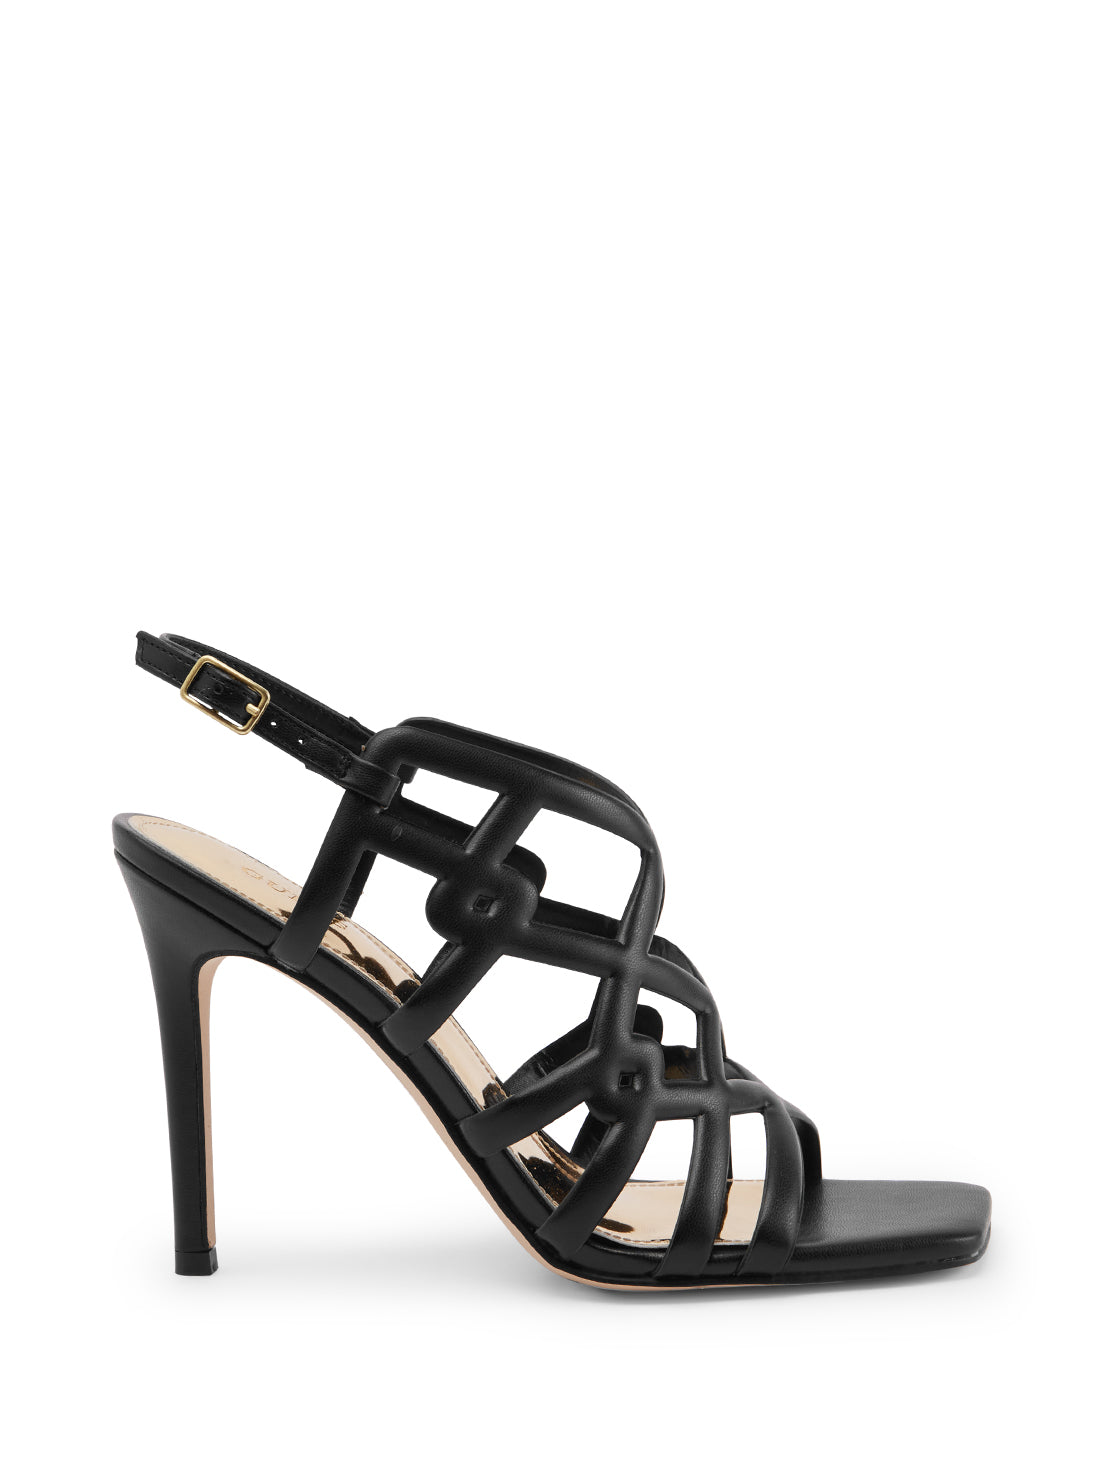 GUESS Women's Black Teama Strappy High Heels TEAMA Side View